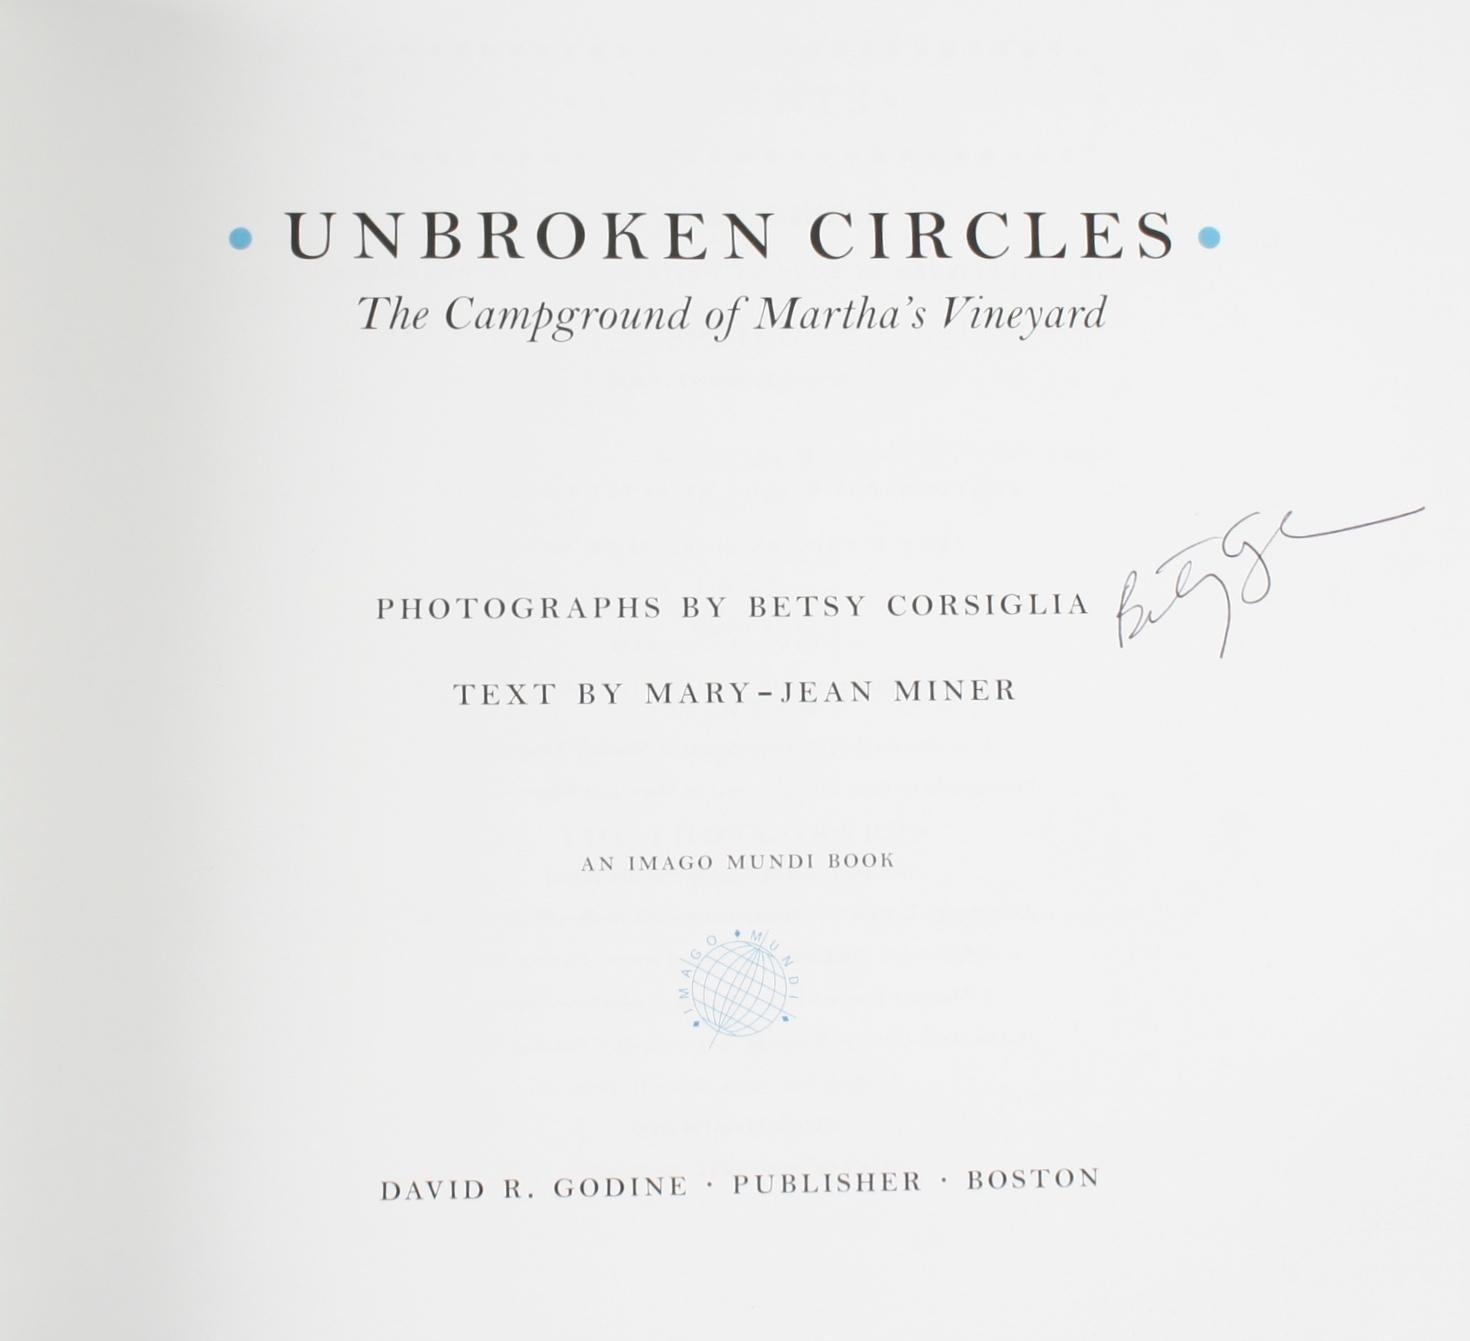 Unbroken Circles: The Campground of Martha's Vineyard by Mary-Jean Miner. David R Godine, 2000. Signed 1st Ed hardcover with dust jacket. 122pp. 120 photographs of the people and the houses of the Methodist Campground on Martha's Vineyard.